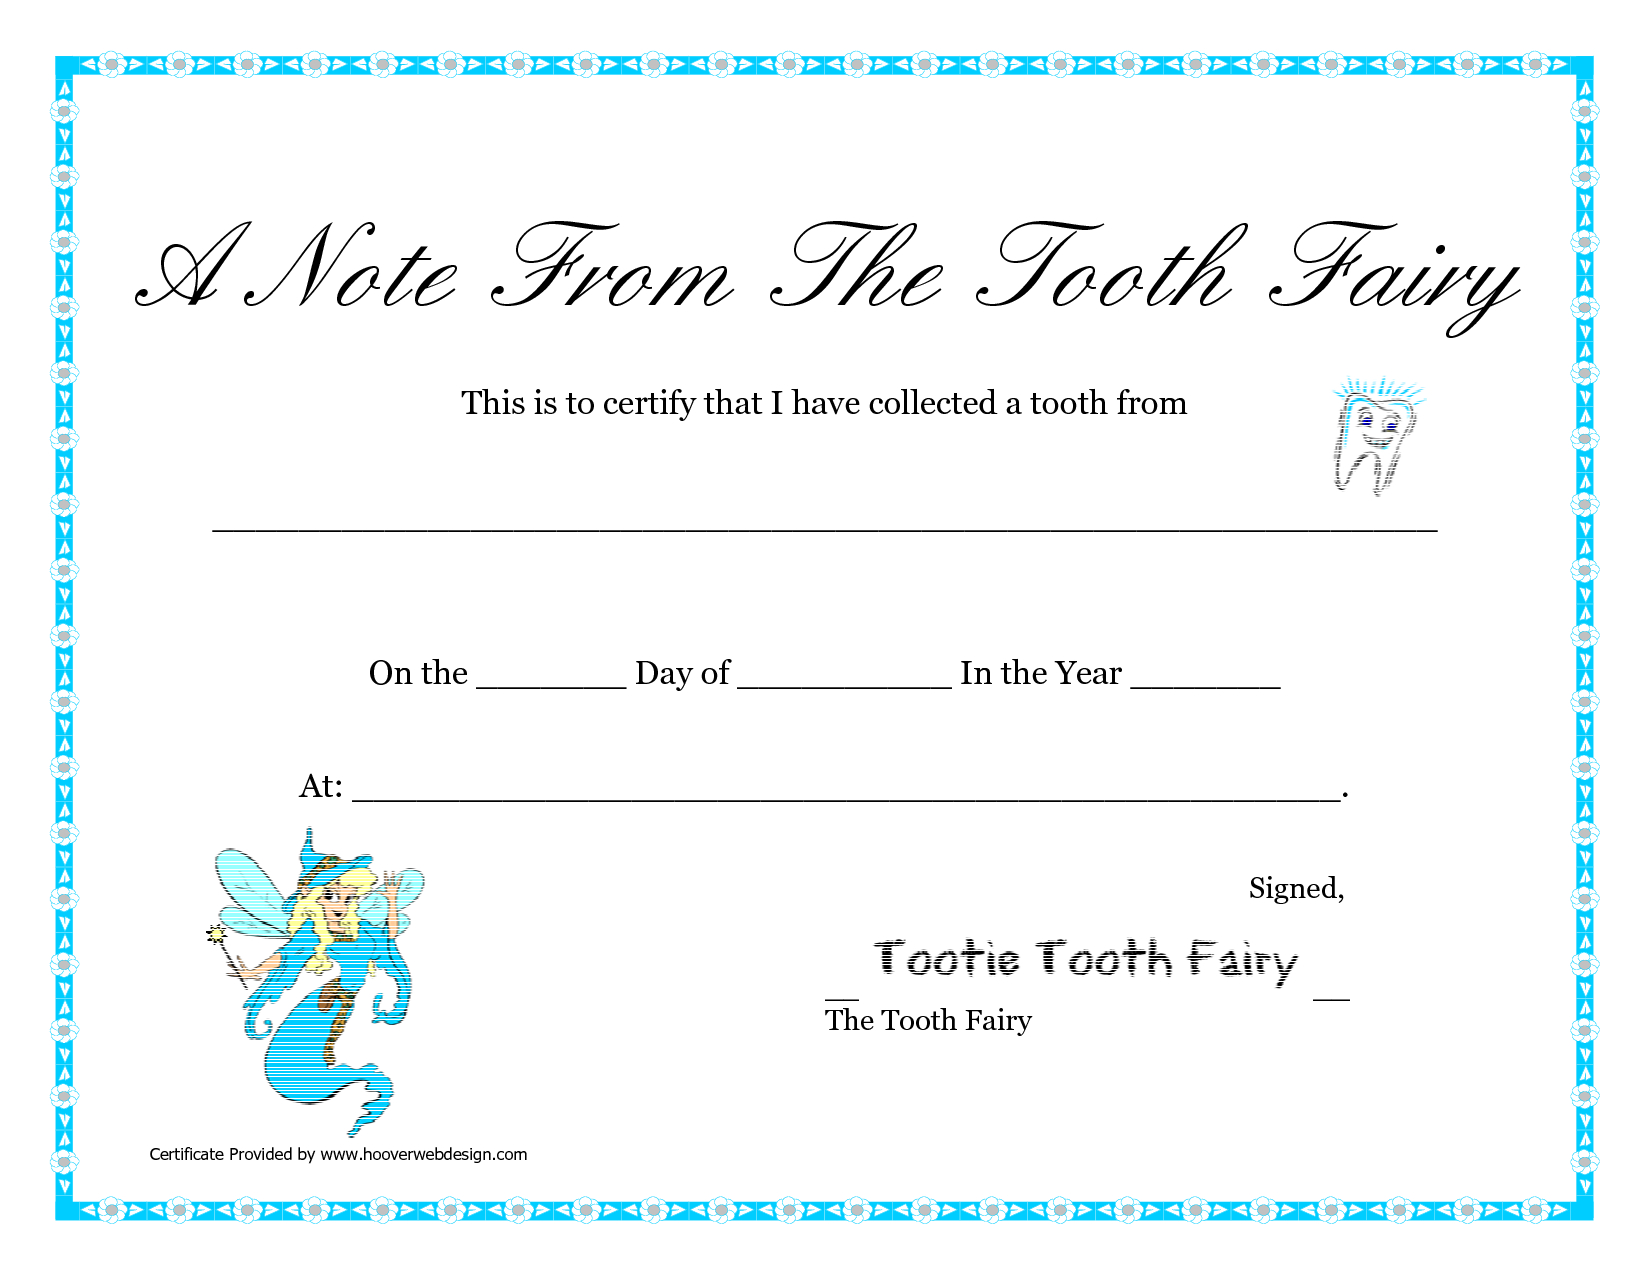 Free Customizable Tooth Fairy Letters! Opens In Word So You Can Type